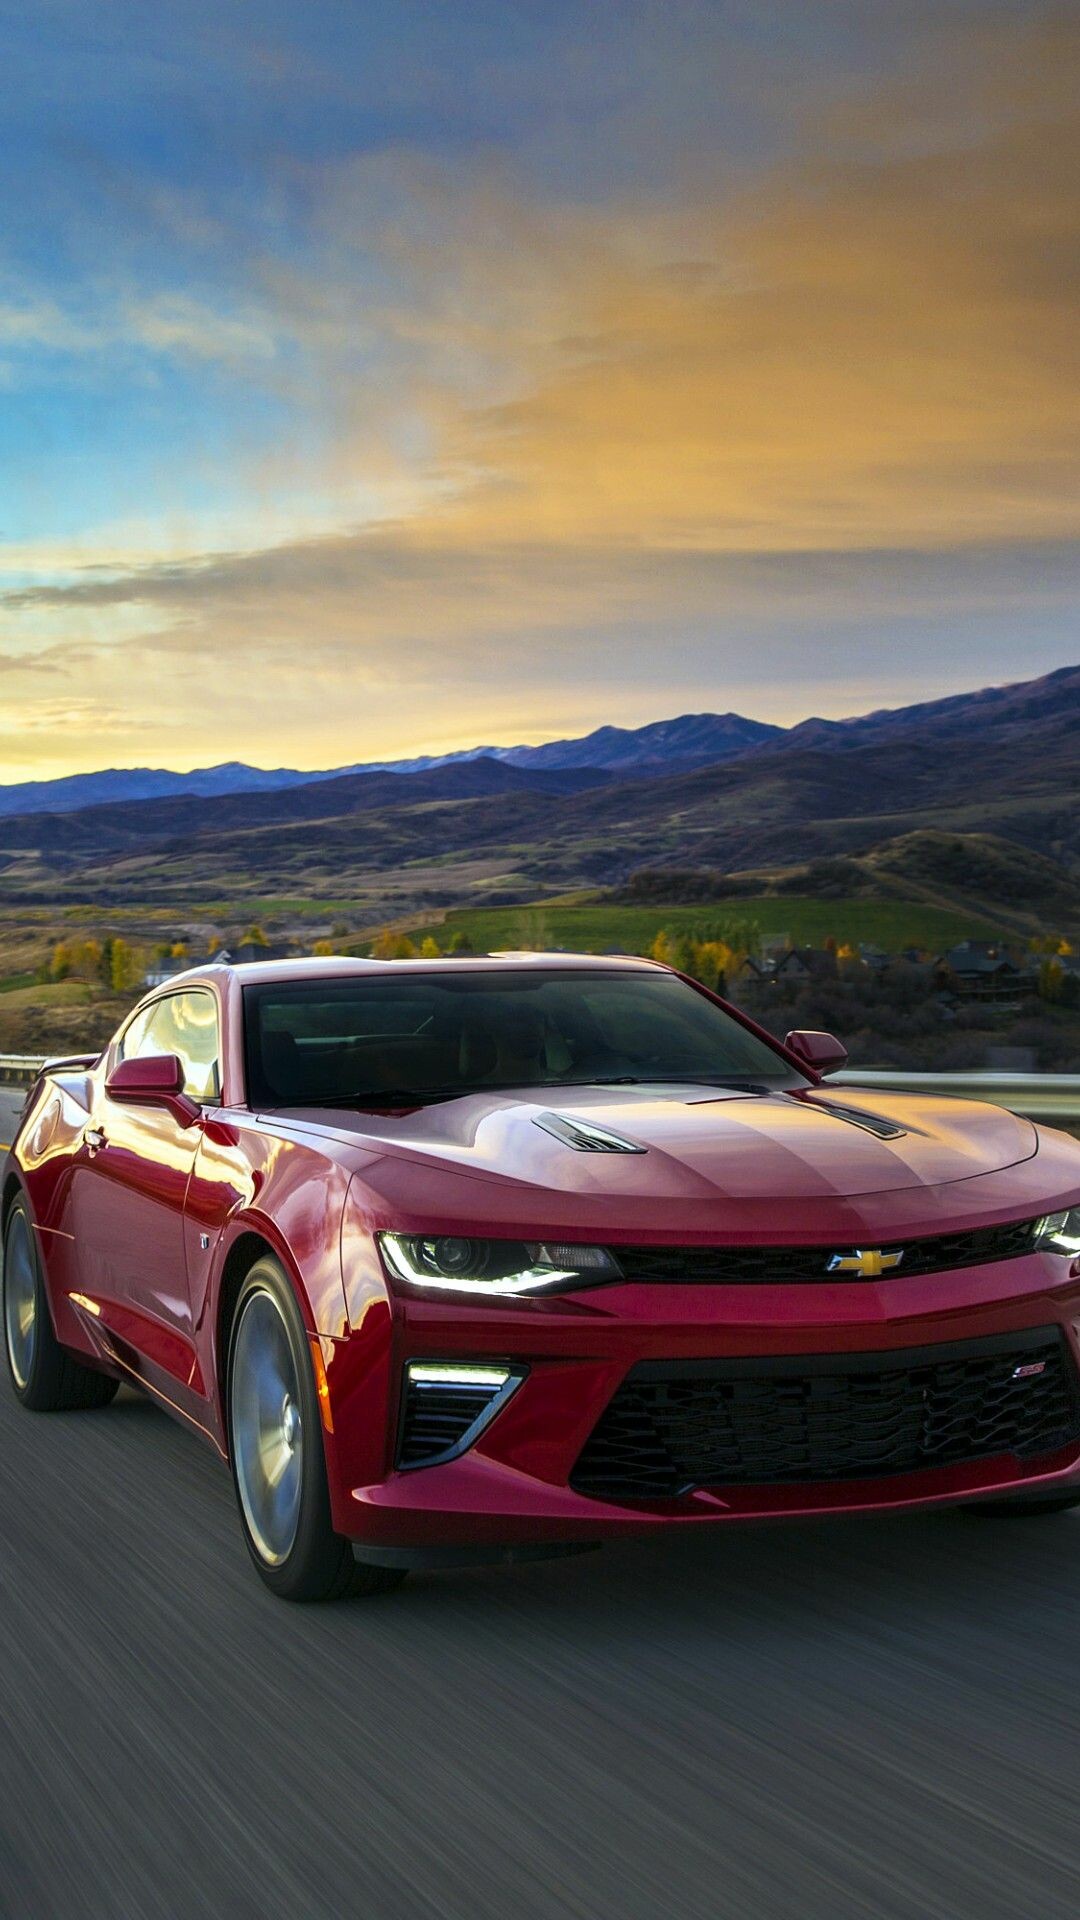 Chevrolet: Chev is among the most popular automobile brands in the world, known for delivering high-quality, reliable cars in various shapes and sizes. 1080x1920 Full HD Wallpaper.